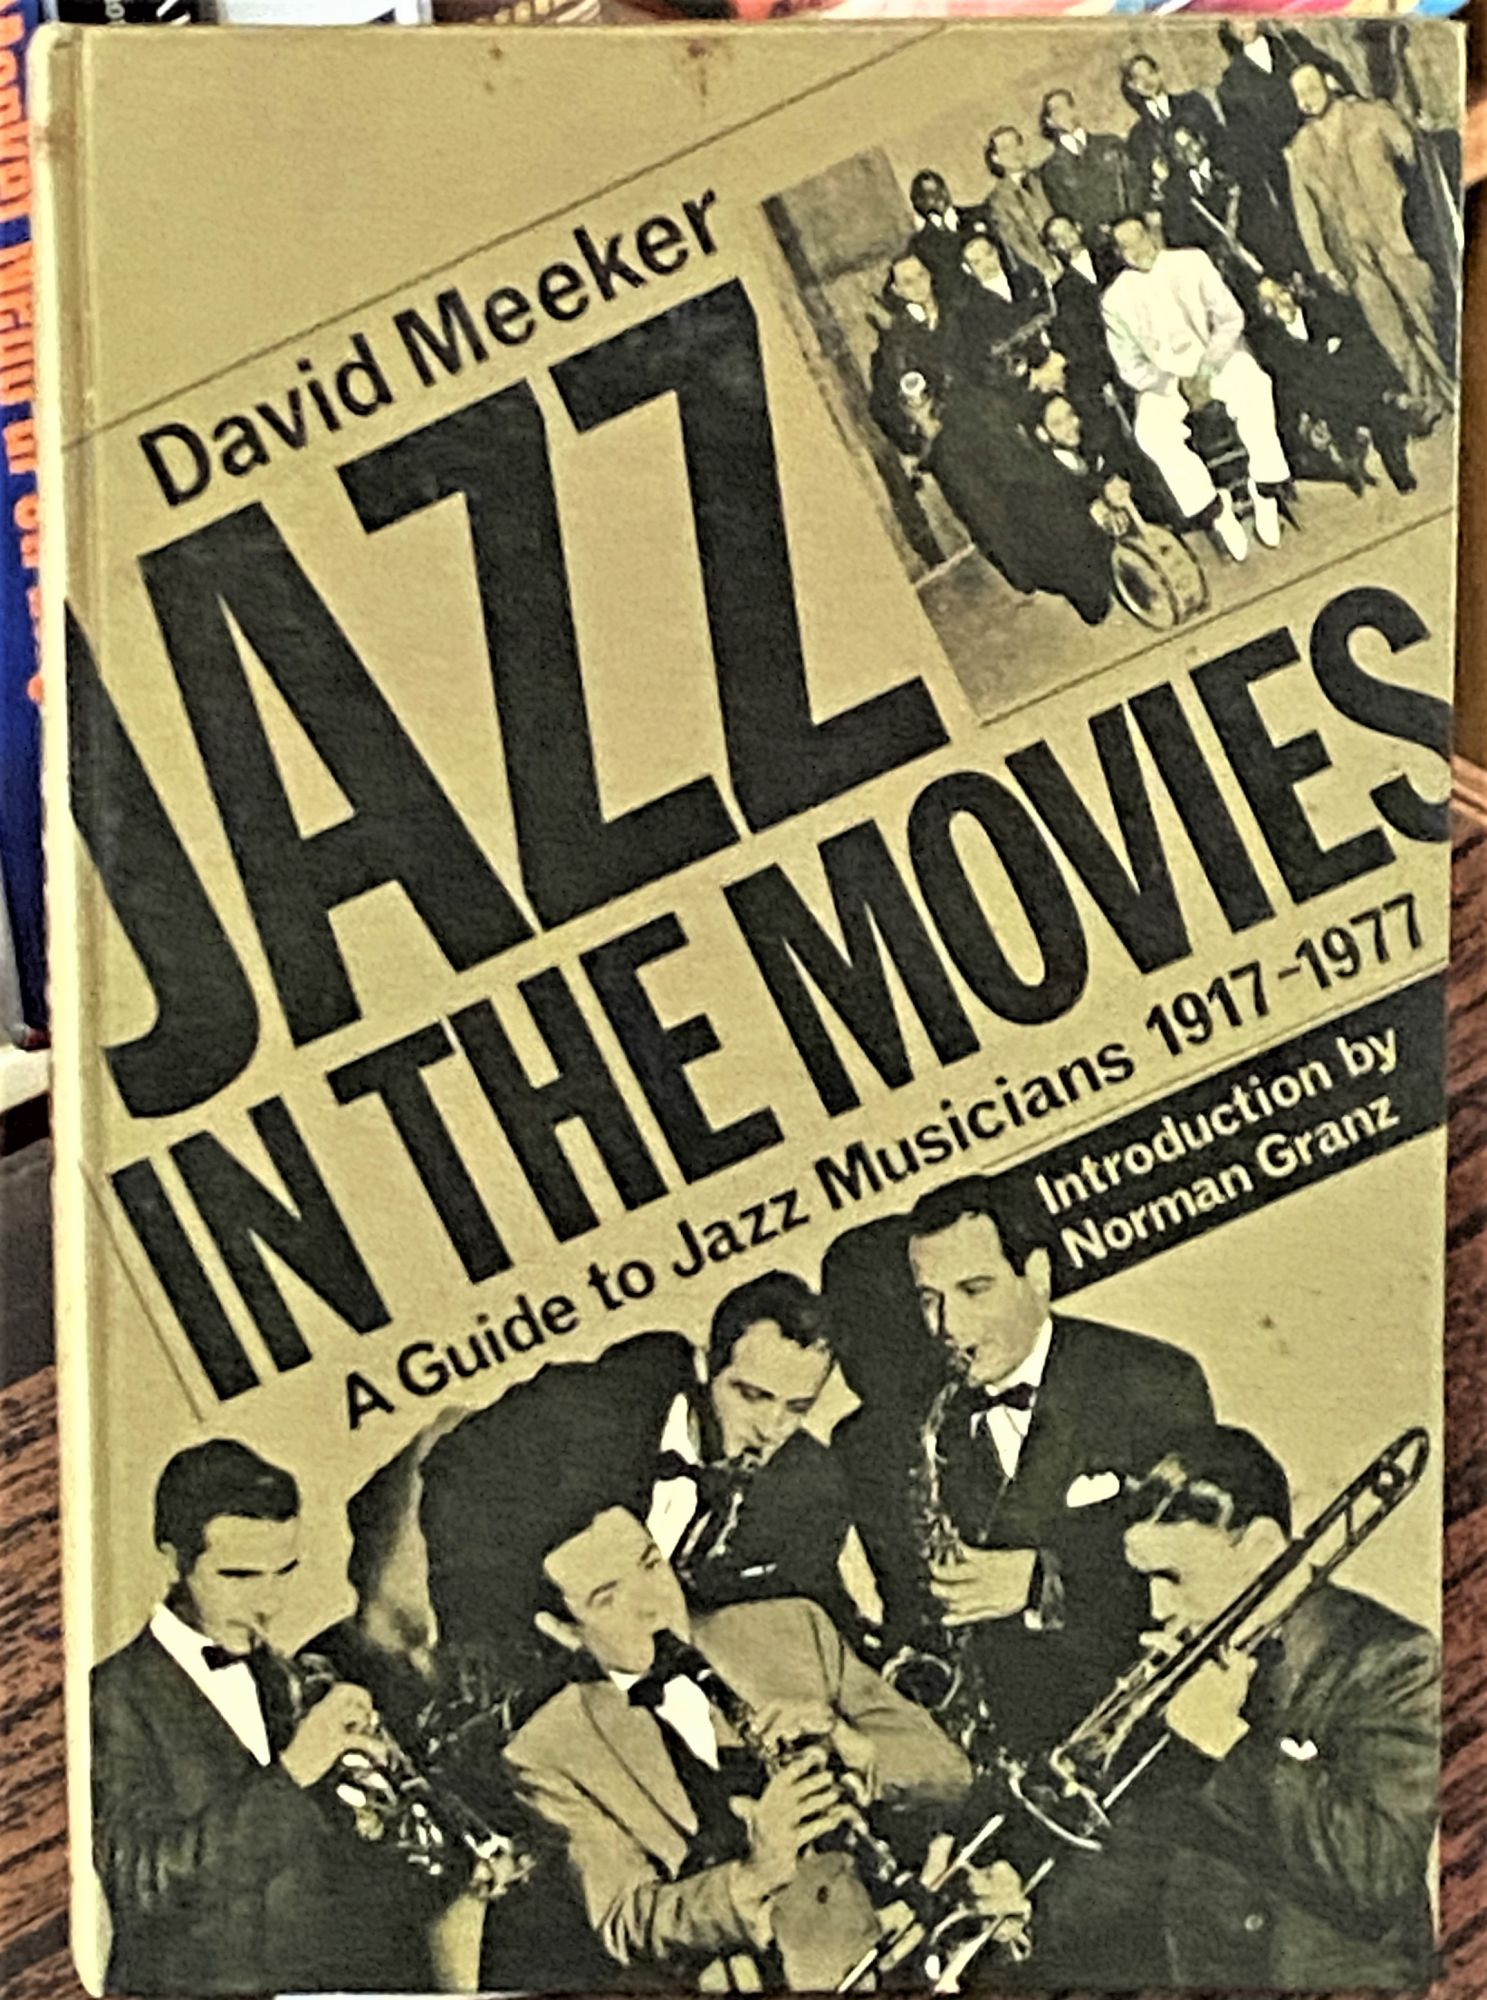 Jazz in the Movies, A Guide to Jazz Musicians 1917-1977 by David Meeker ...